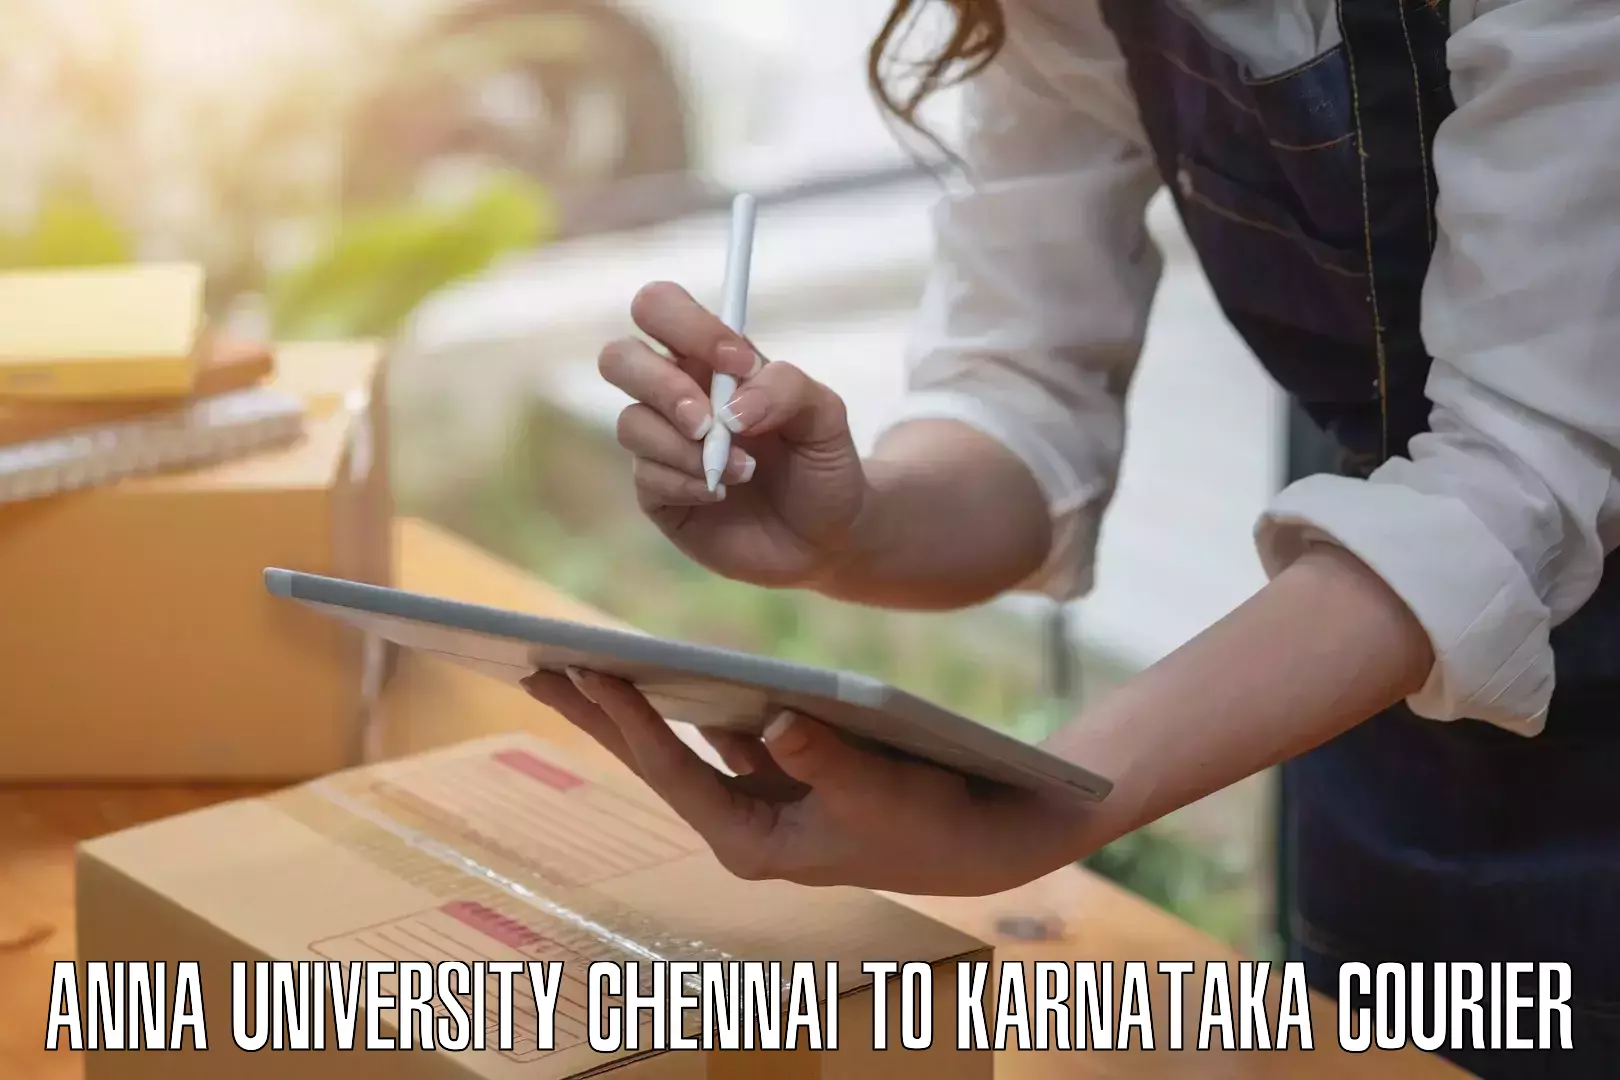 Luggage shipment specialists Anna University Chennai to Manipal Academy of Higher Education